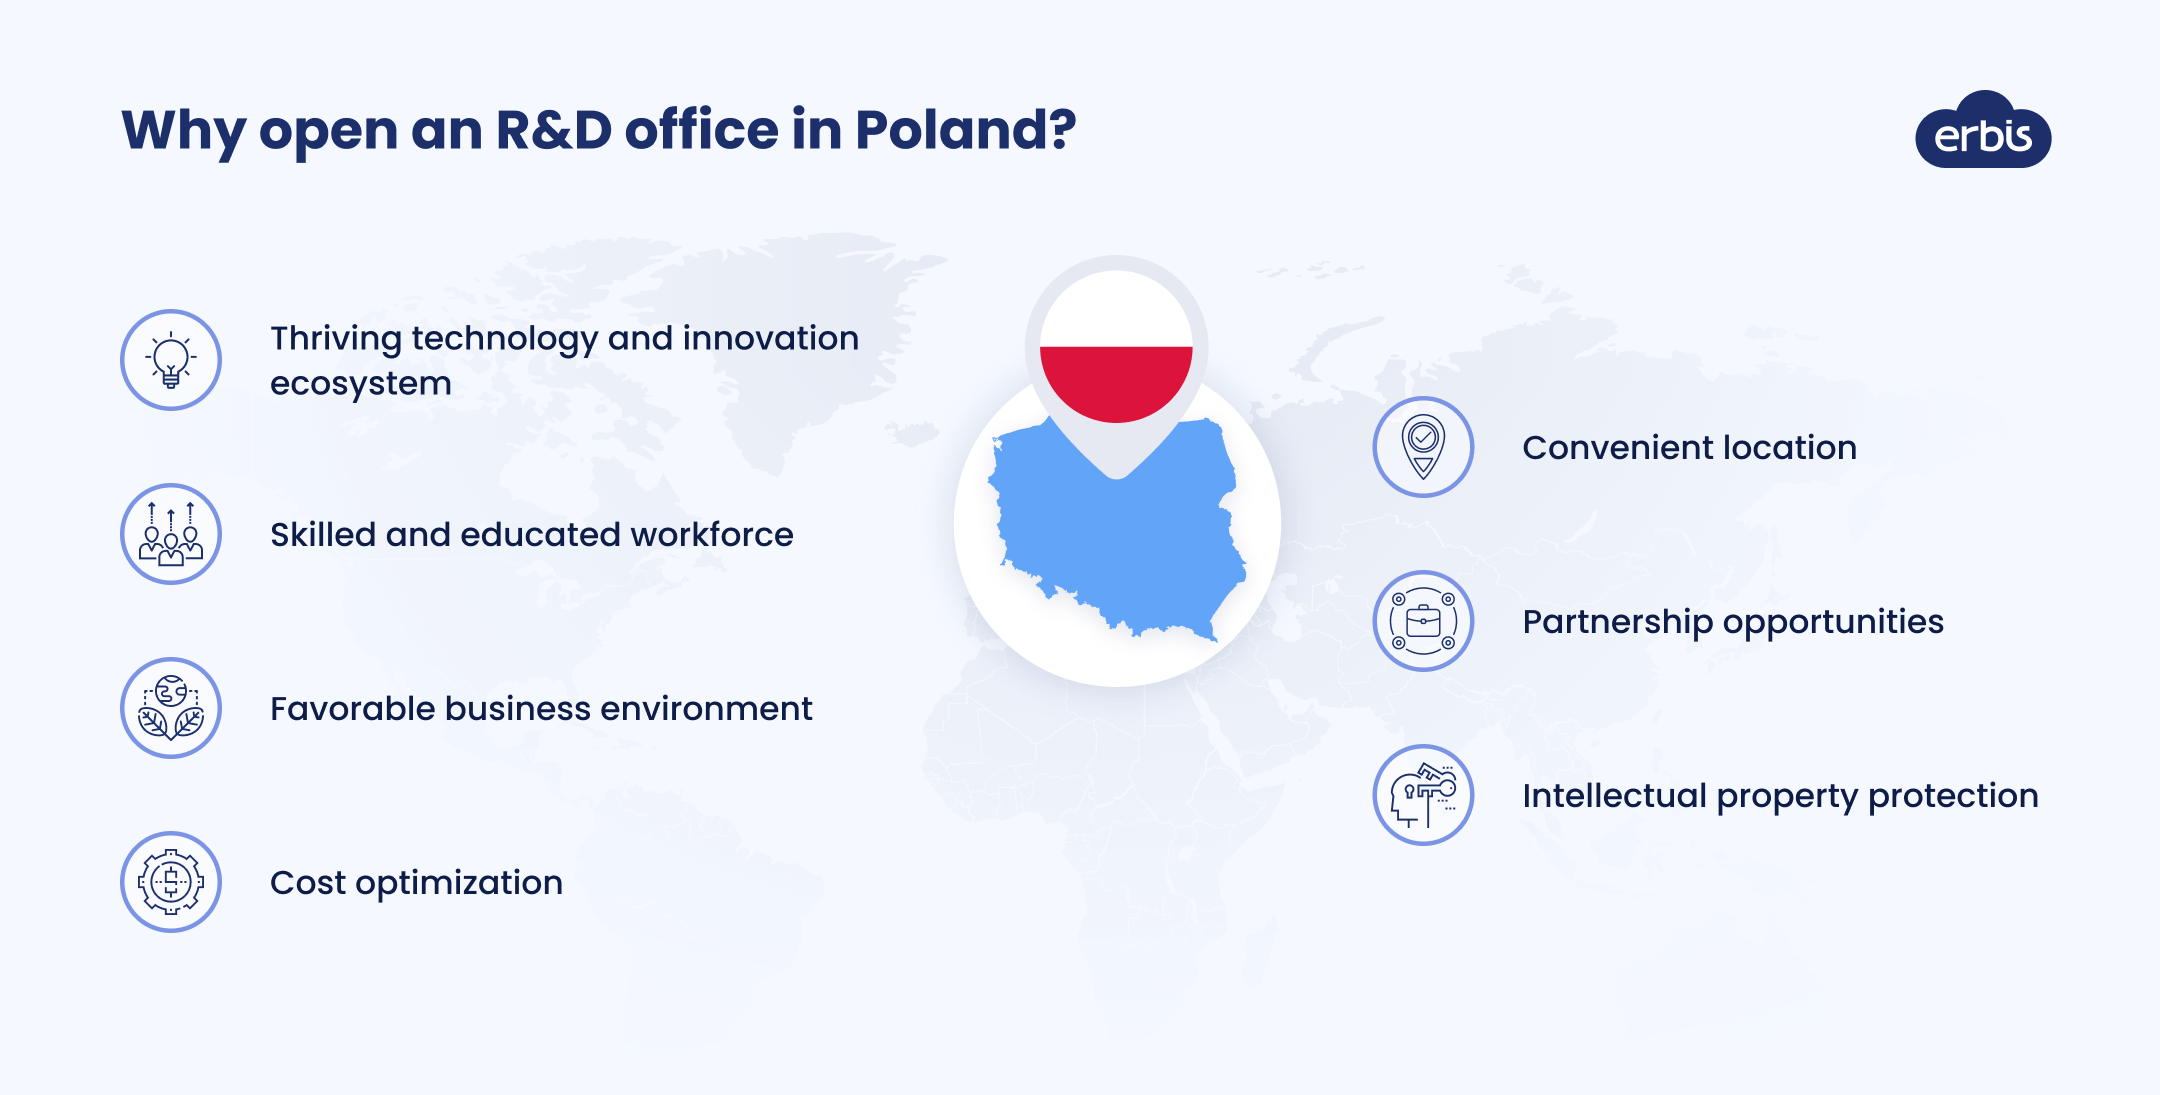 Benefits of opening an R&D office in Poland